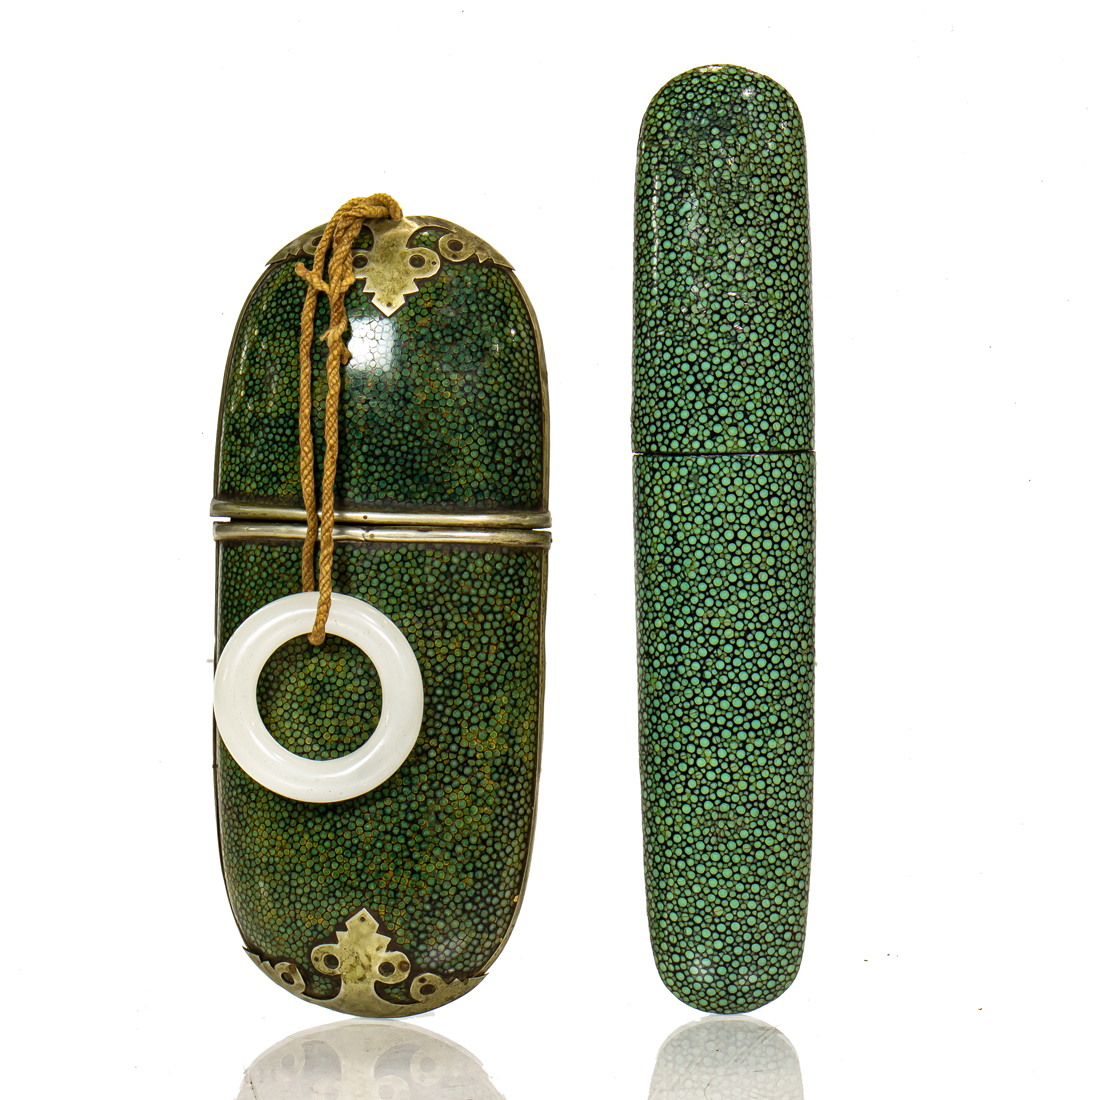  LOT OF 2 JAPANESE SHAGREEN CASES 3a24fa